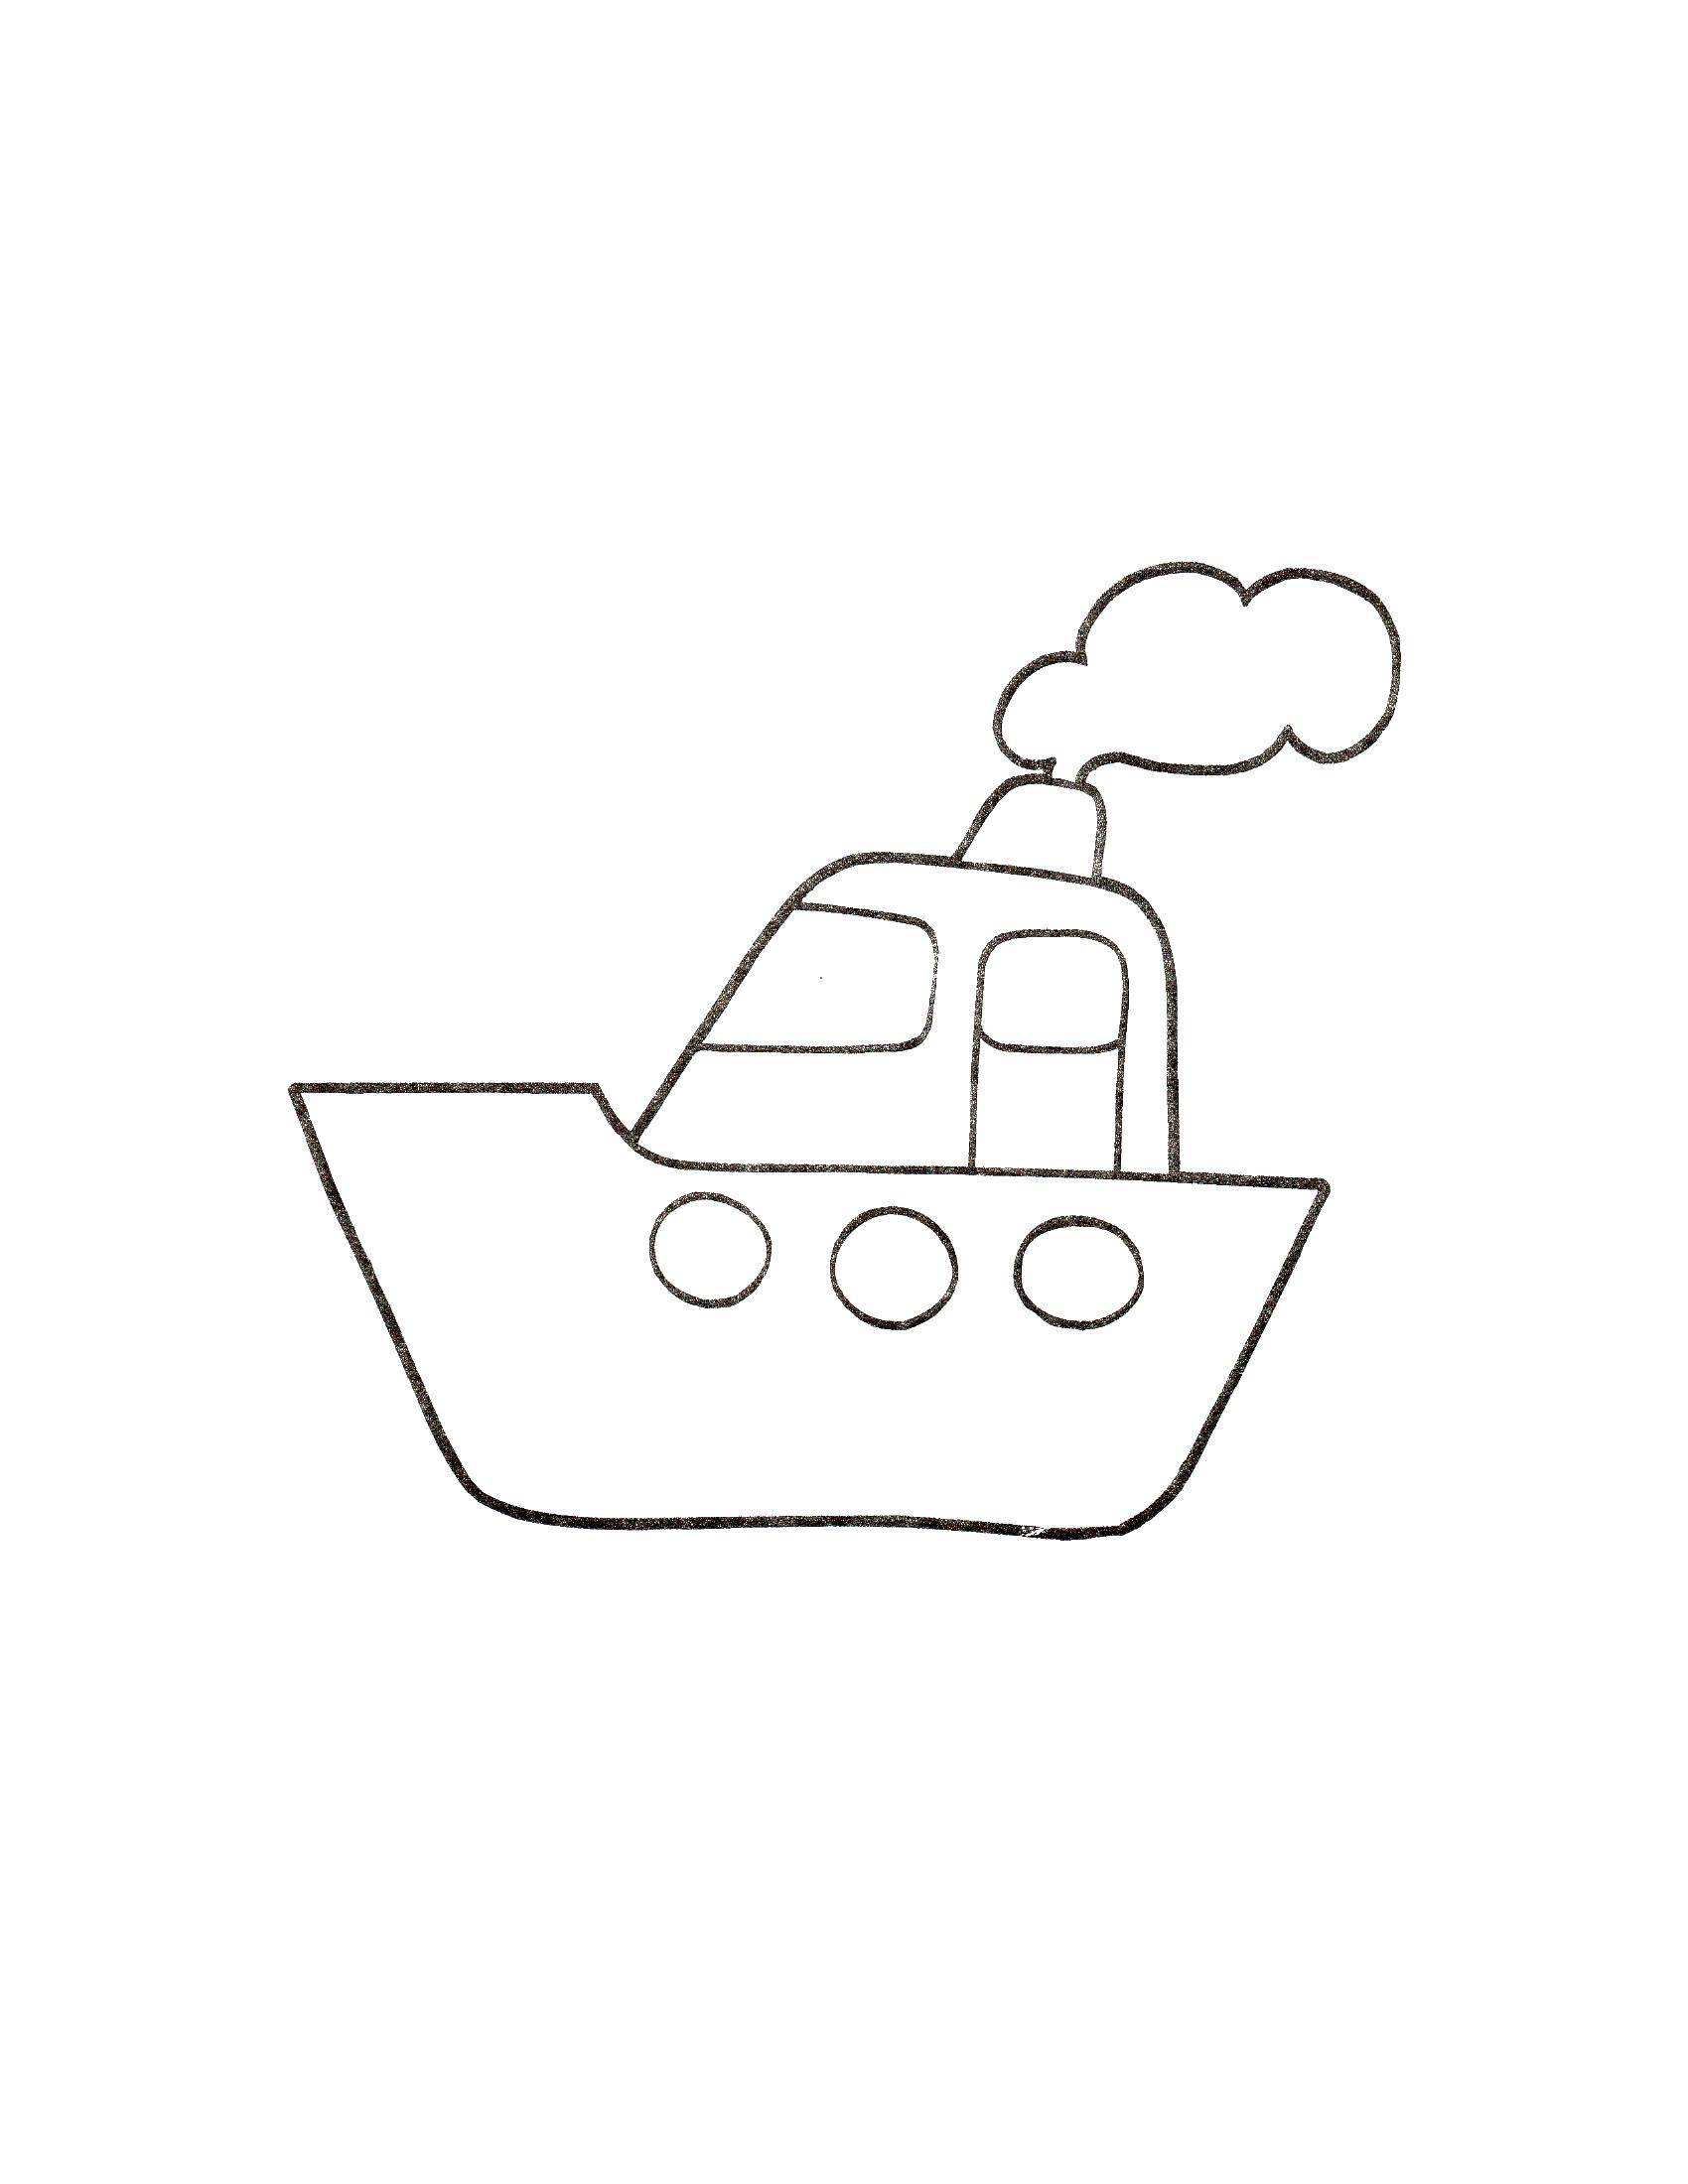 Coloring The boat on the water. Category little ones. Tags:  Ship, steamboat.